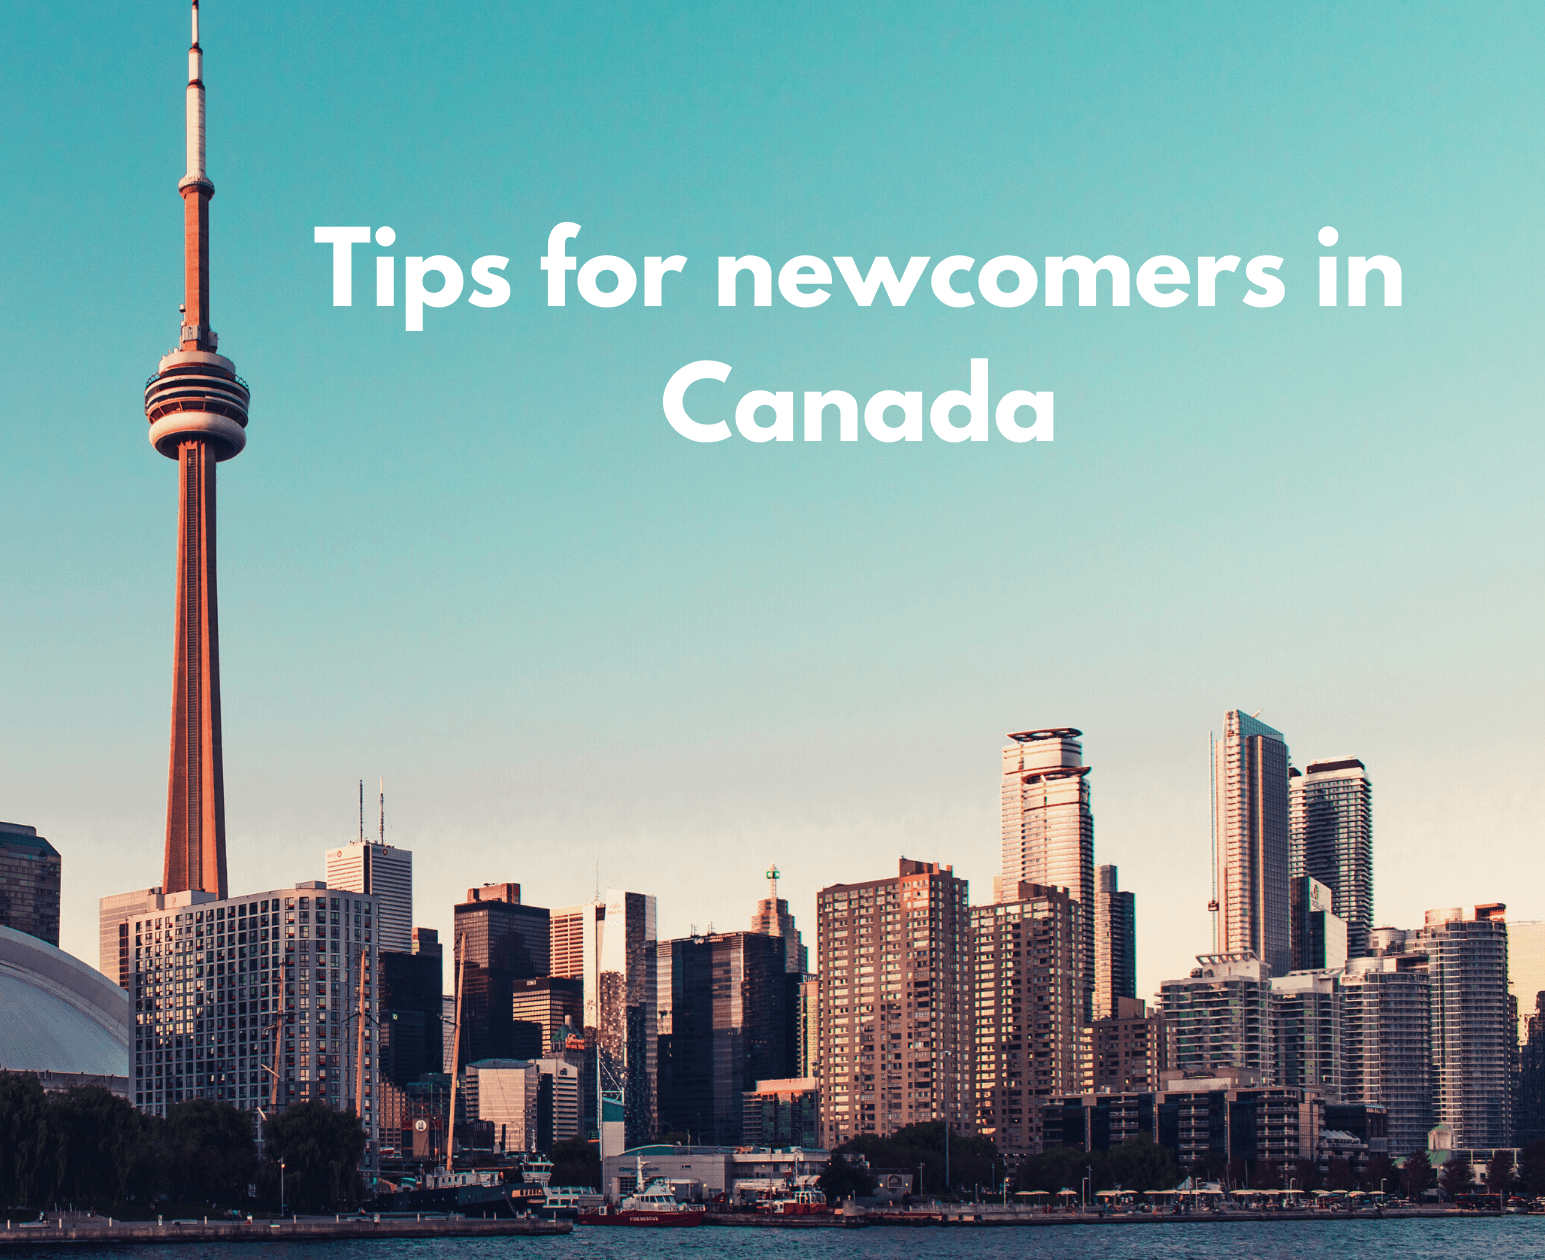 Tips for newcomers in Canada